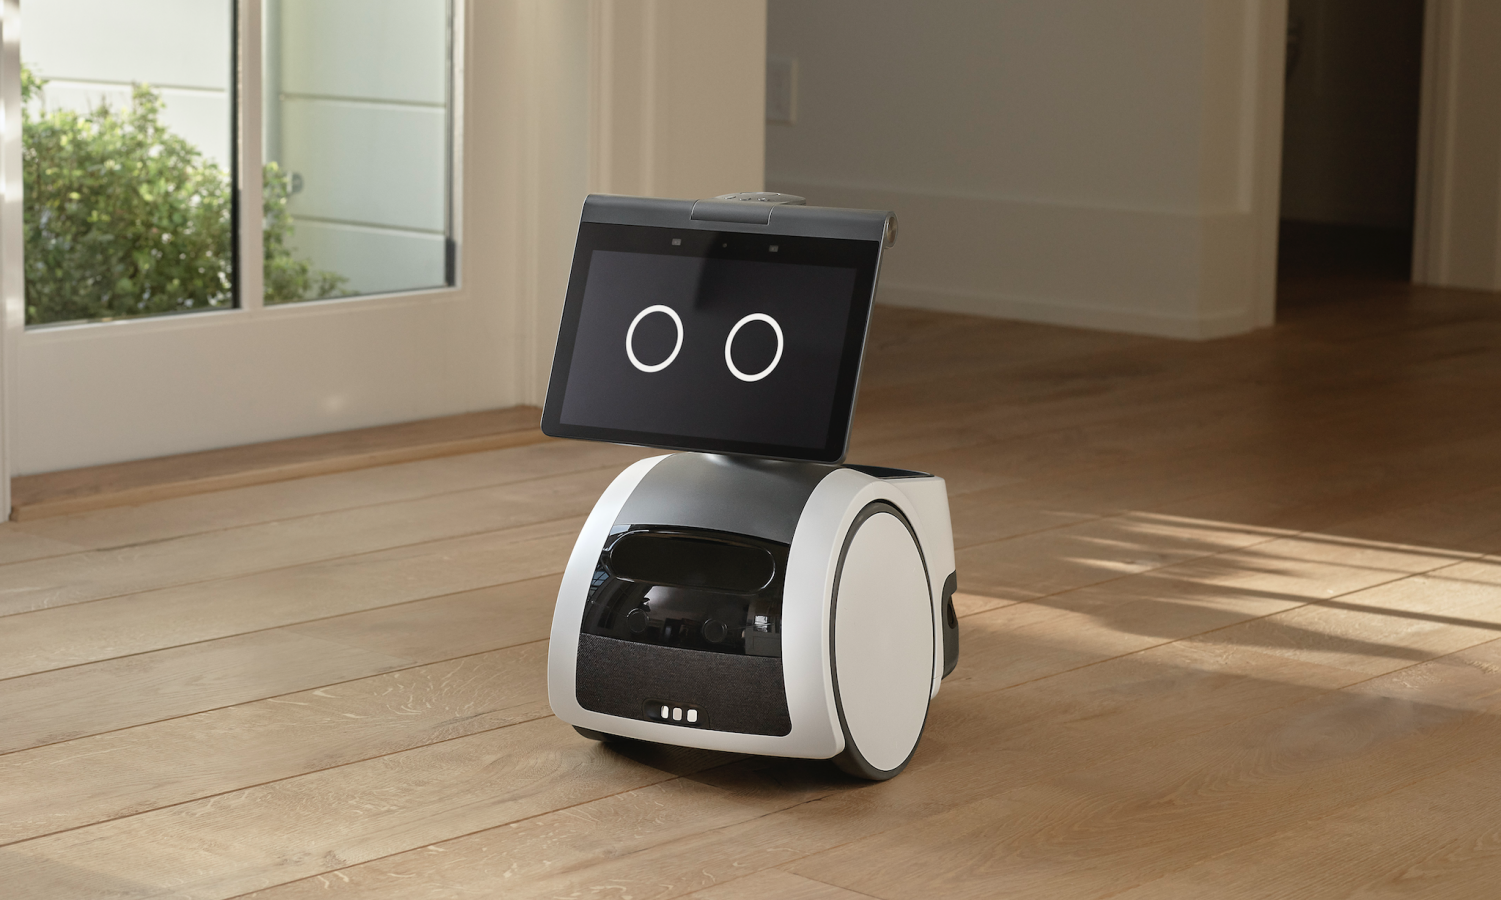 Astro, the useless little domestic robot